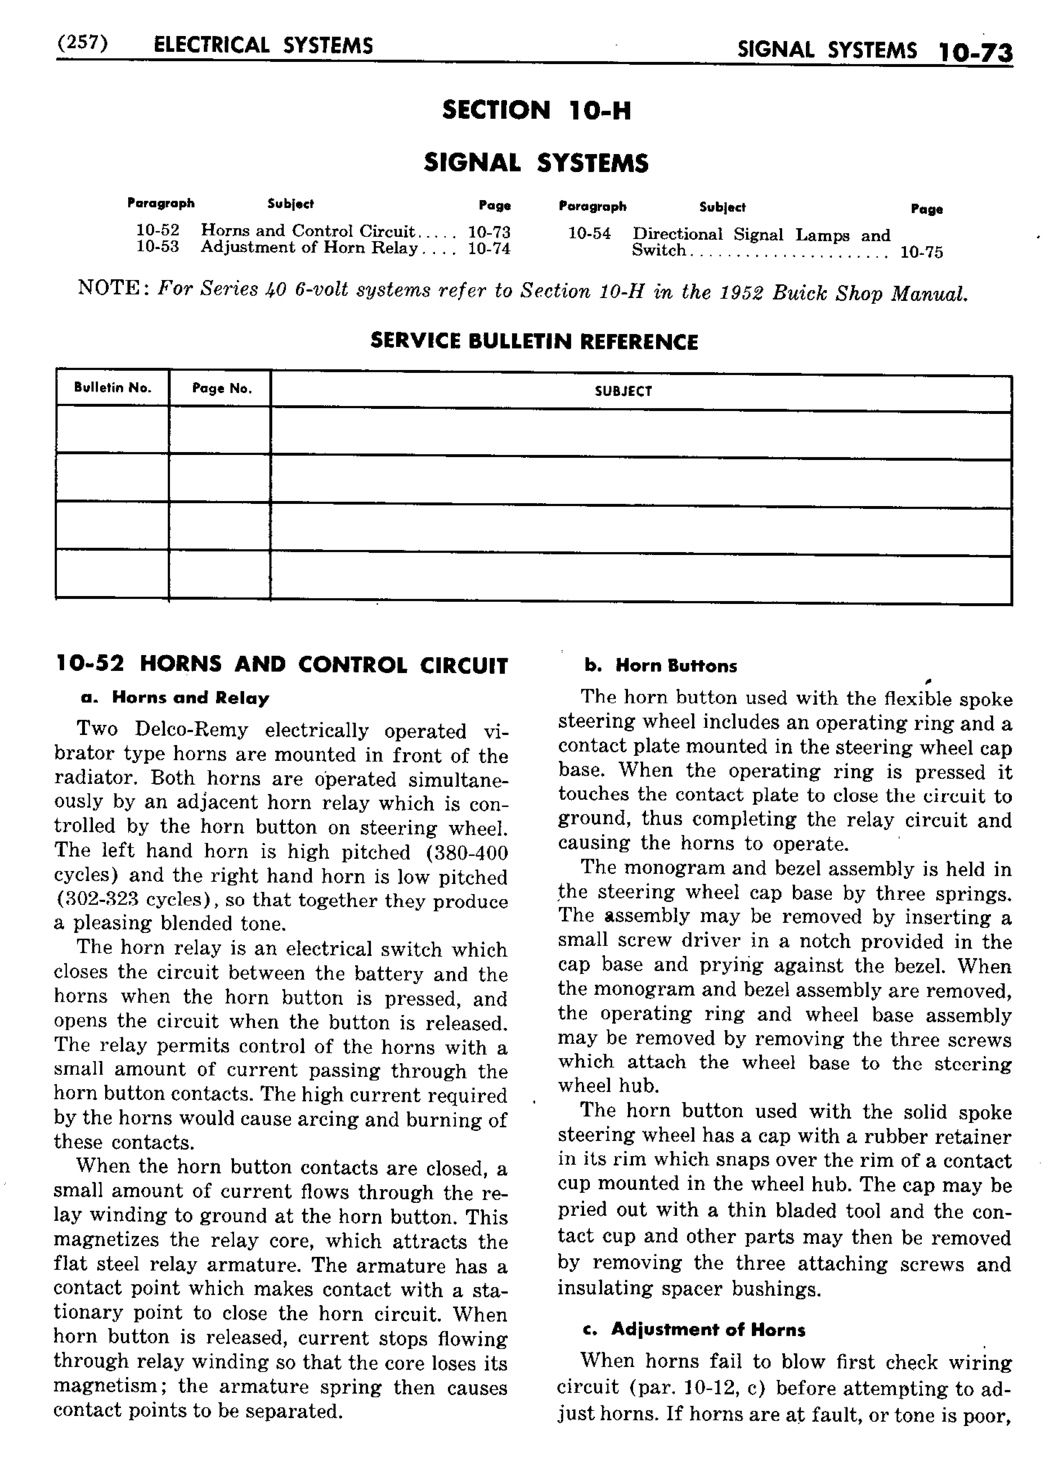 n_11 1953 Buick Shop Manual - Electrical Systems-074-074.jpg